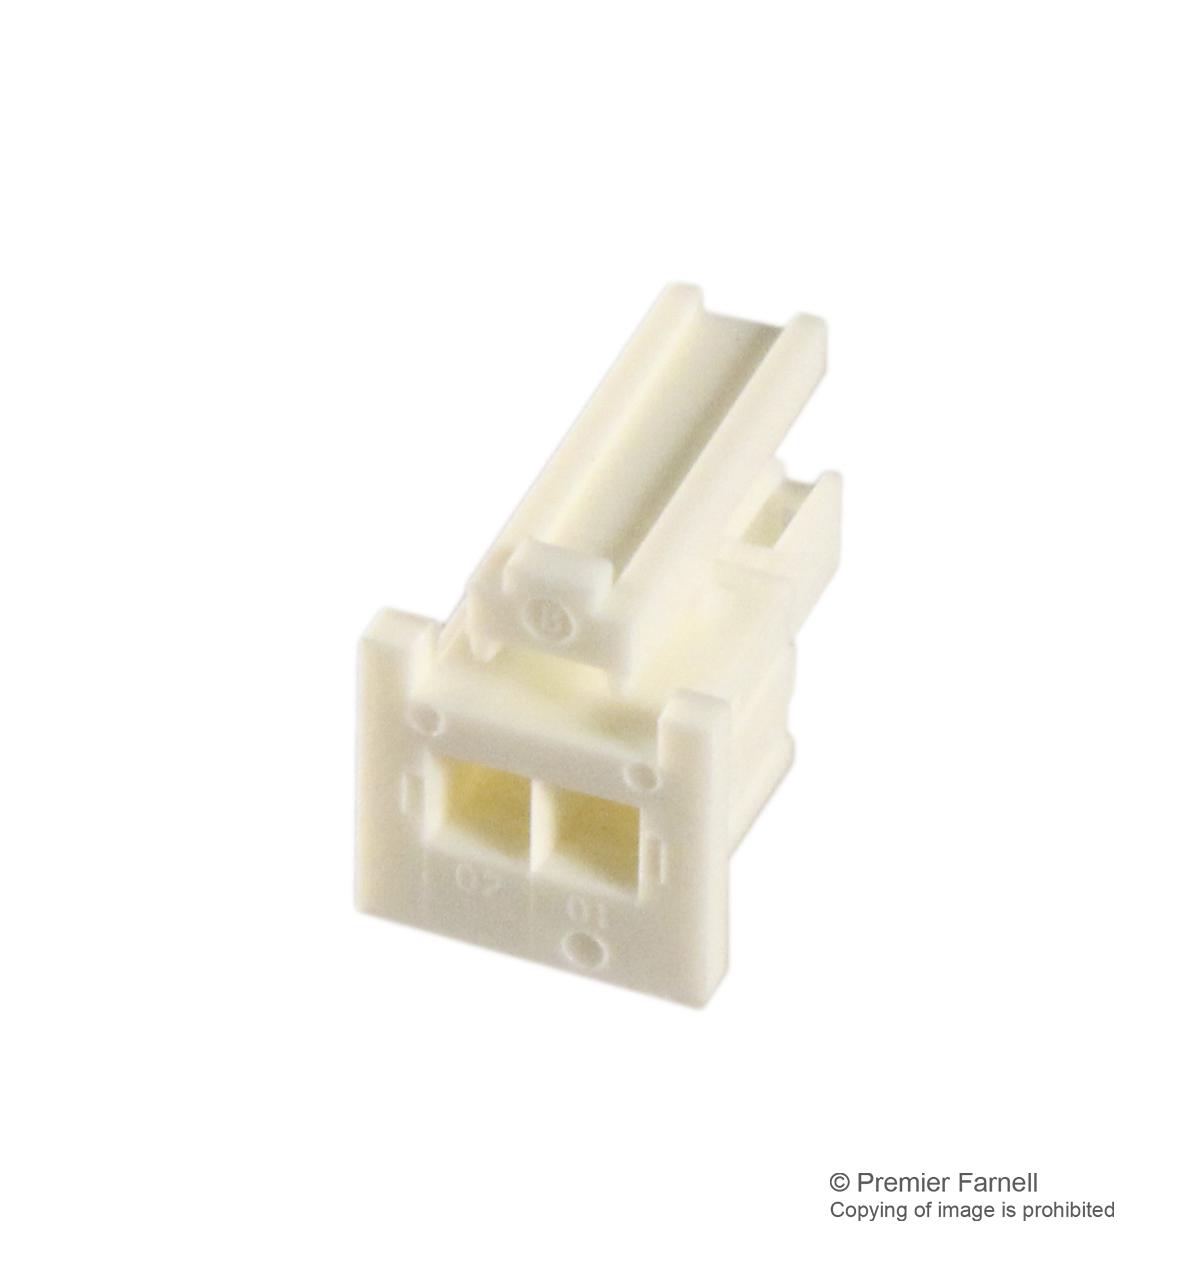 IPD1-02-S HOUSING CONNECTOR, RCPT, 2POS, 2.54MM SAMTEC